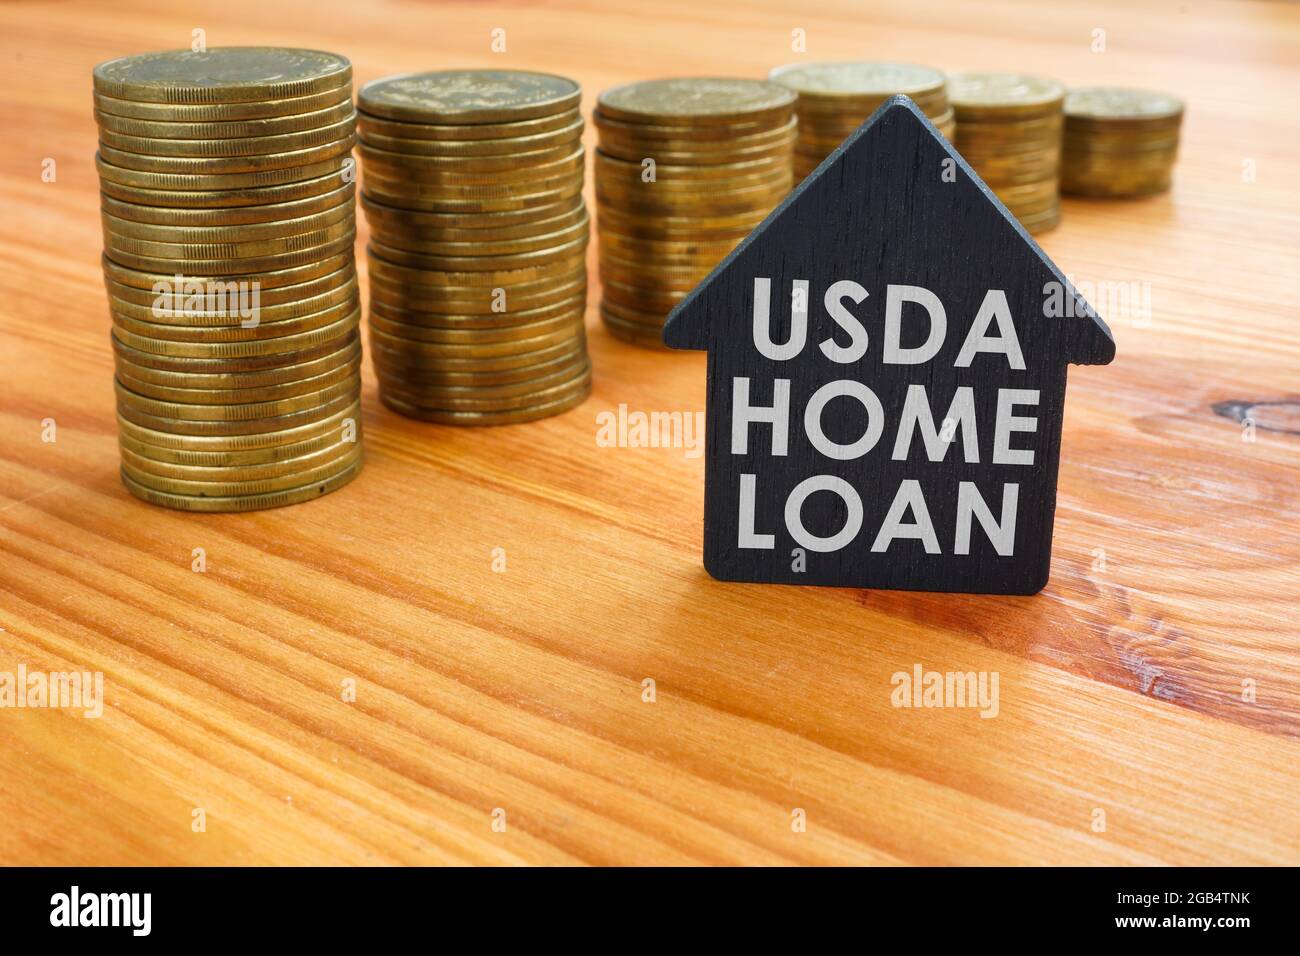 USDA home loan and pile of coins. Stock Photo